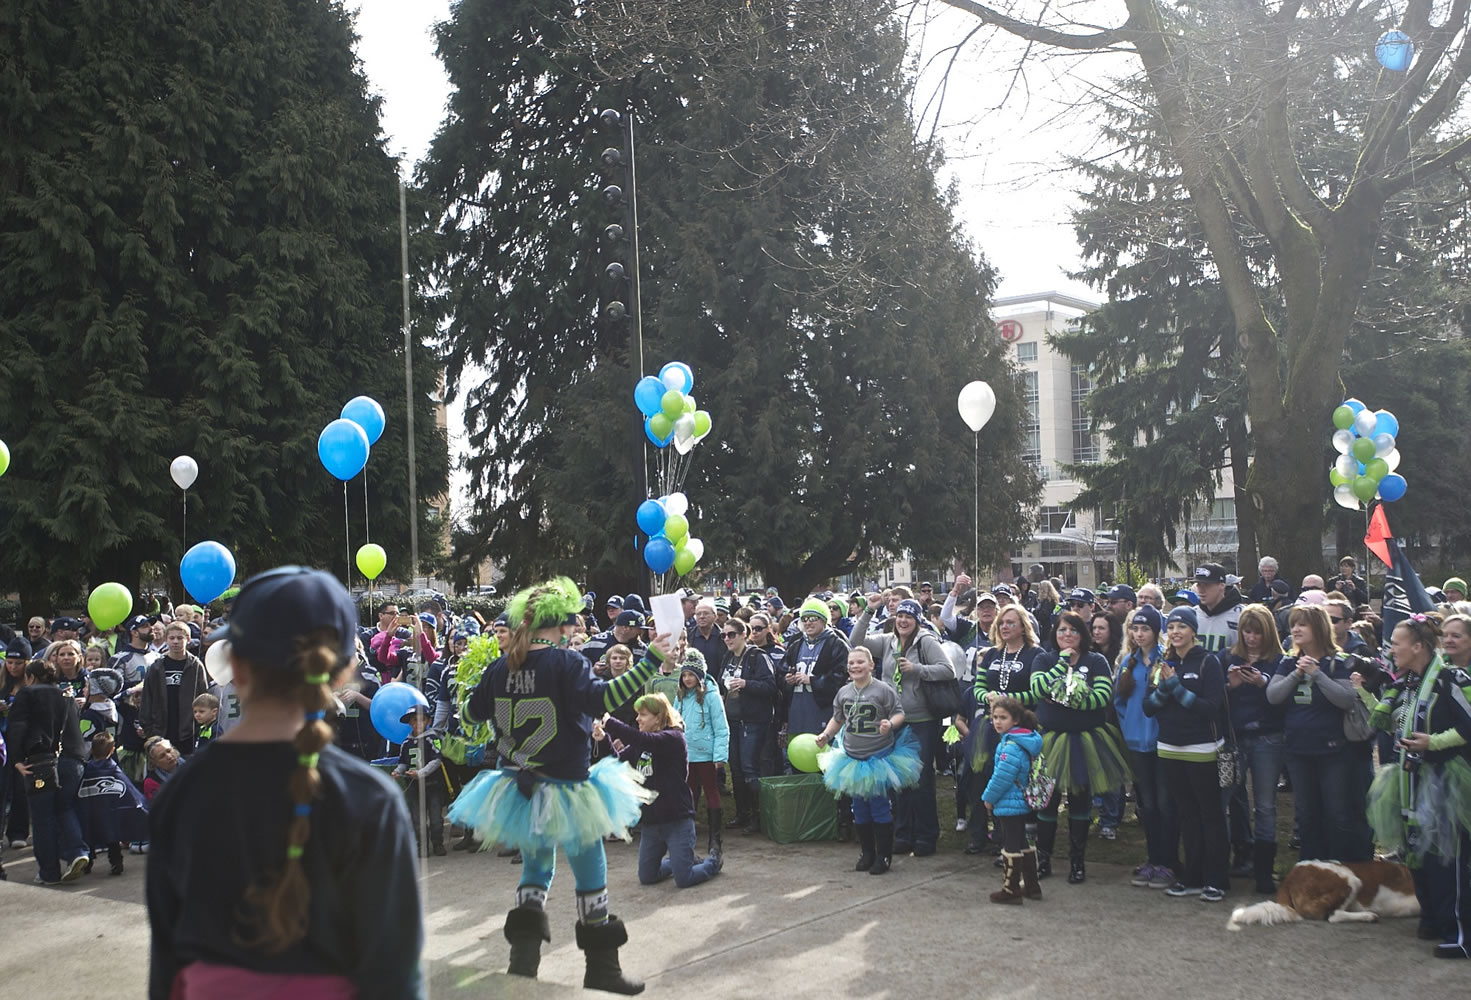 Fans gather to show their support of the Seattle Seahawks at Esther Short Park on Saturday February 1, 2014.